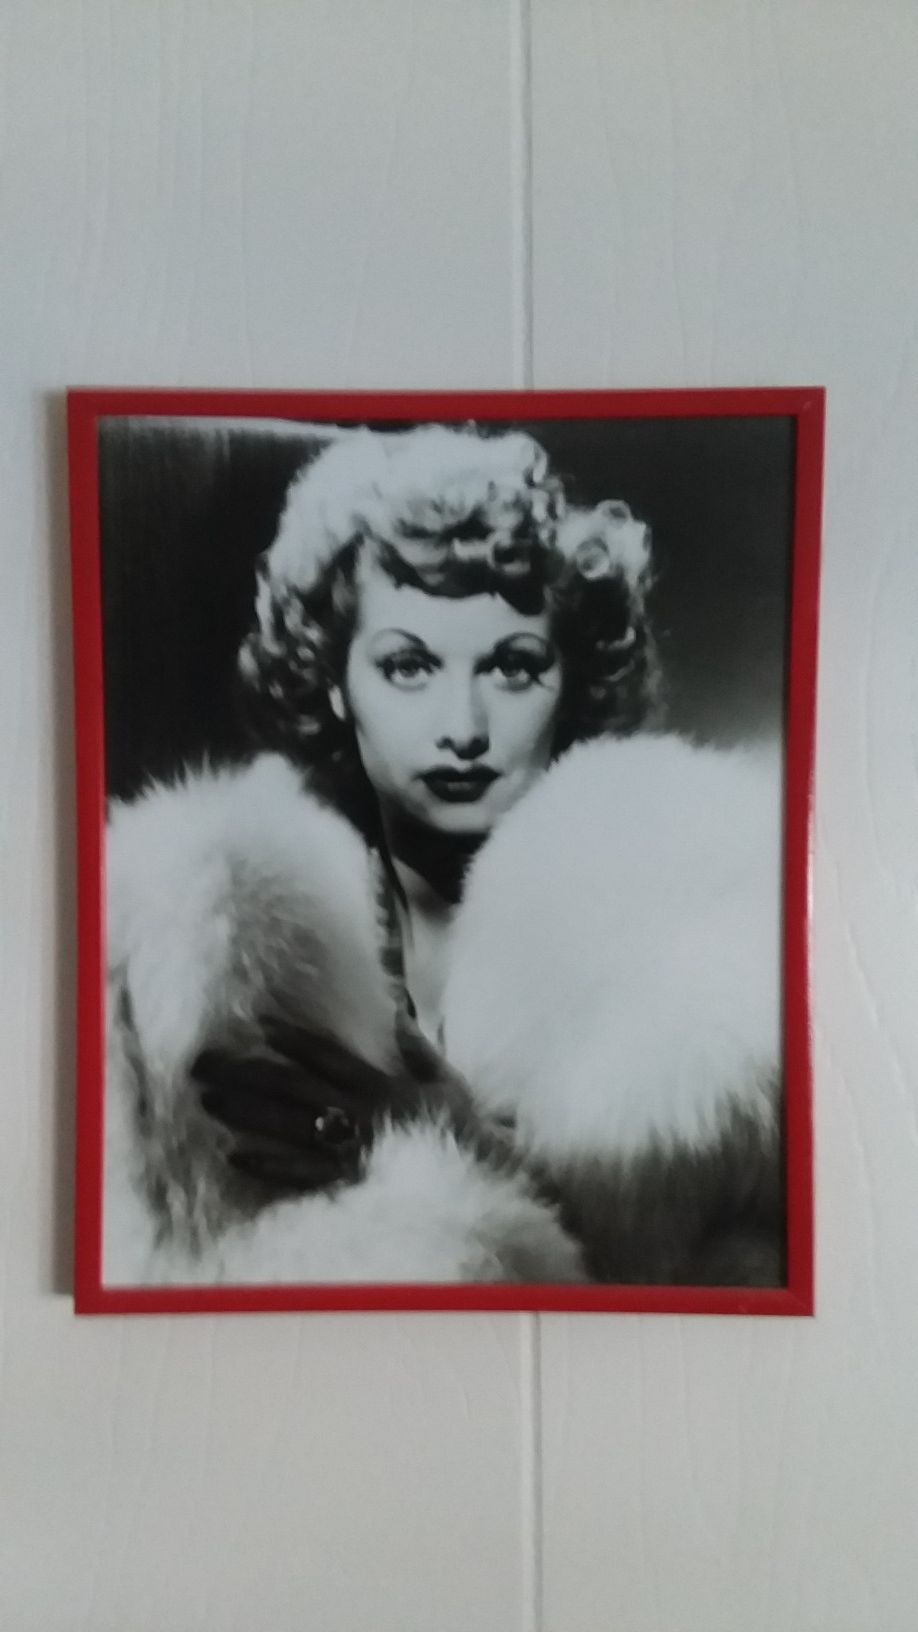 Lucille Ball 8 x 10 photo in metal and glass hanging frame